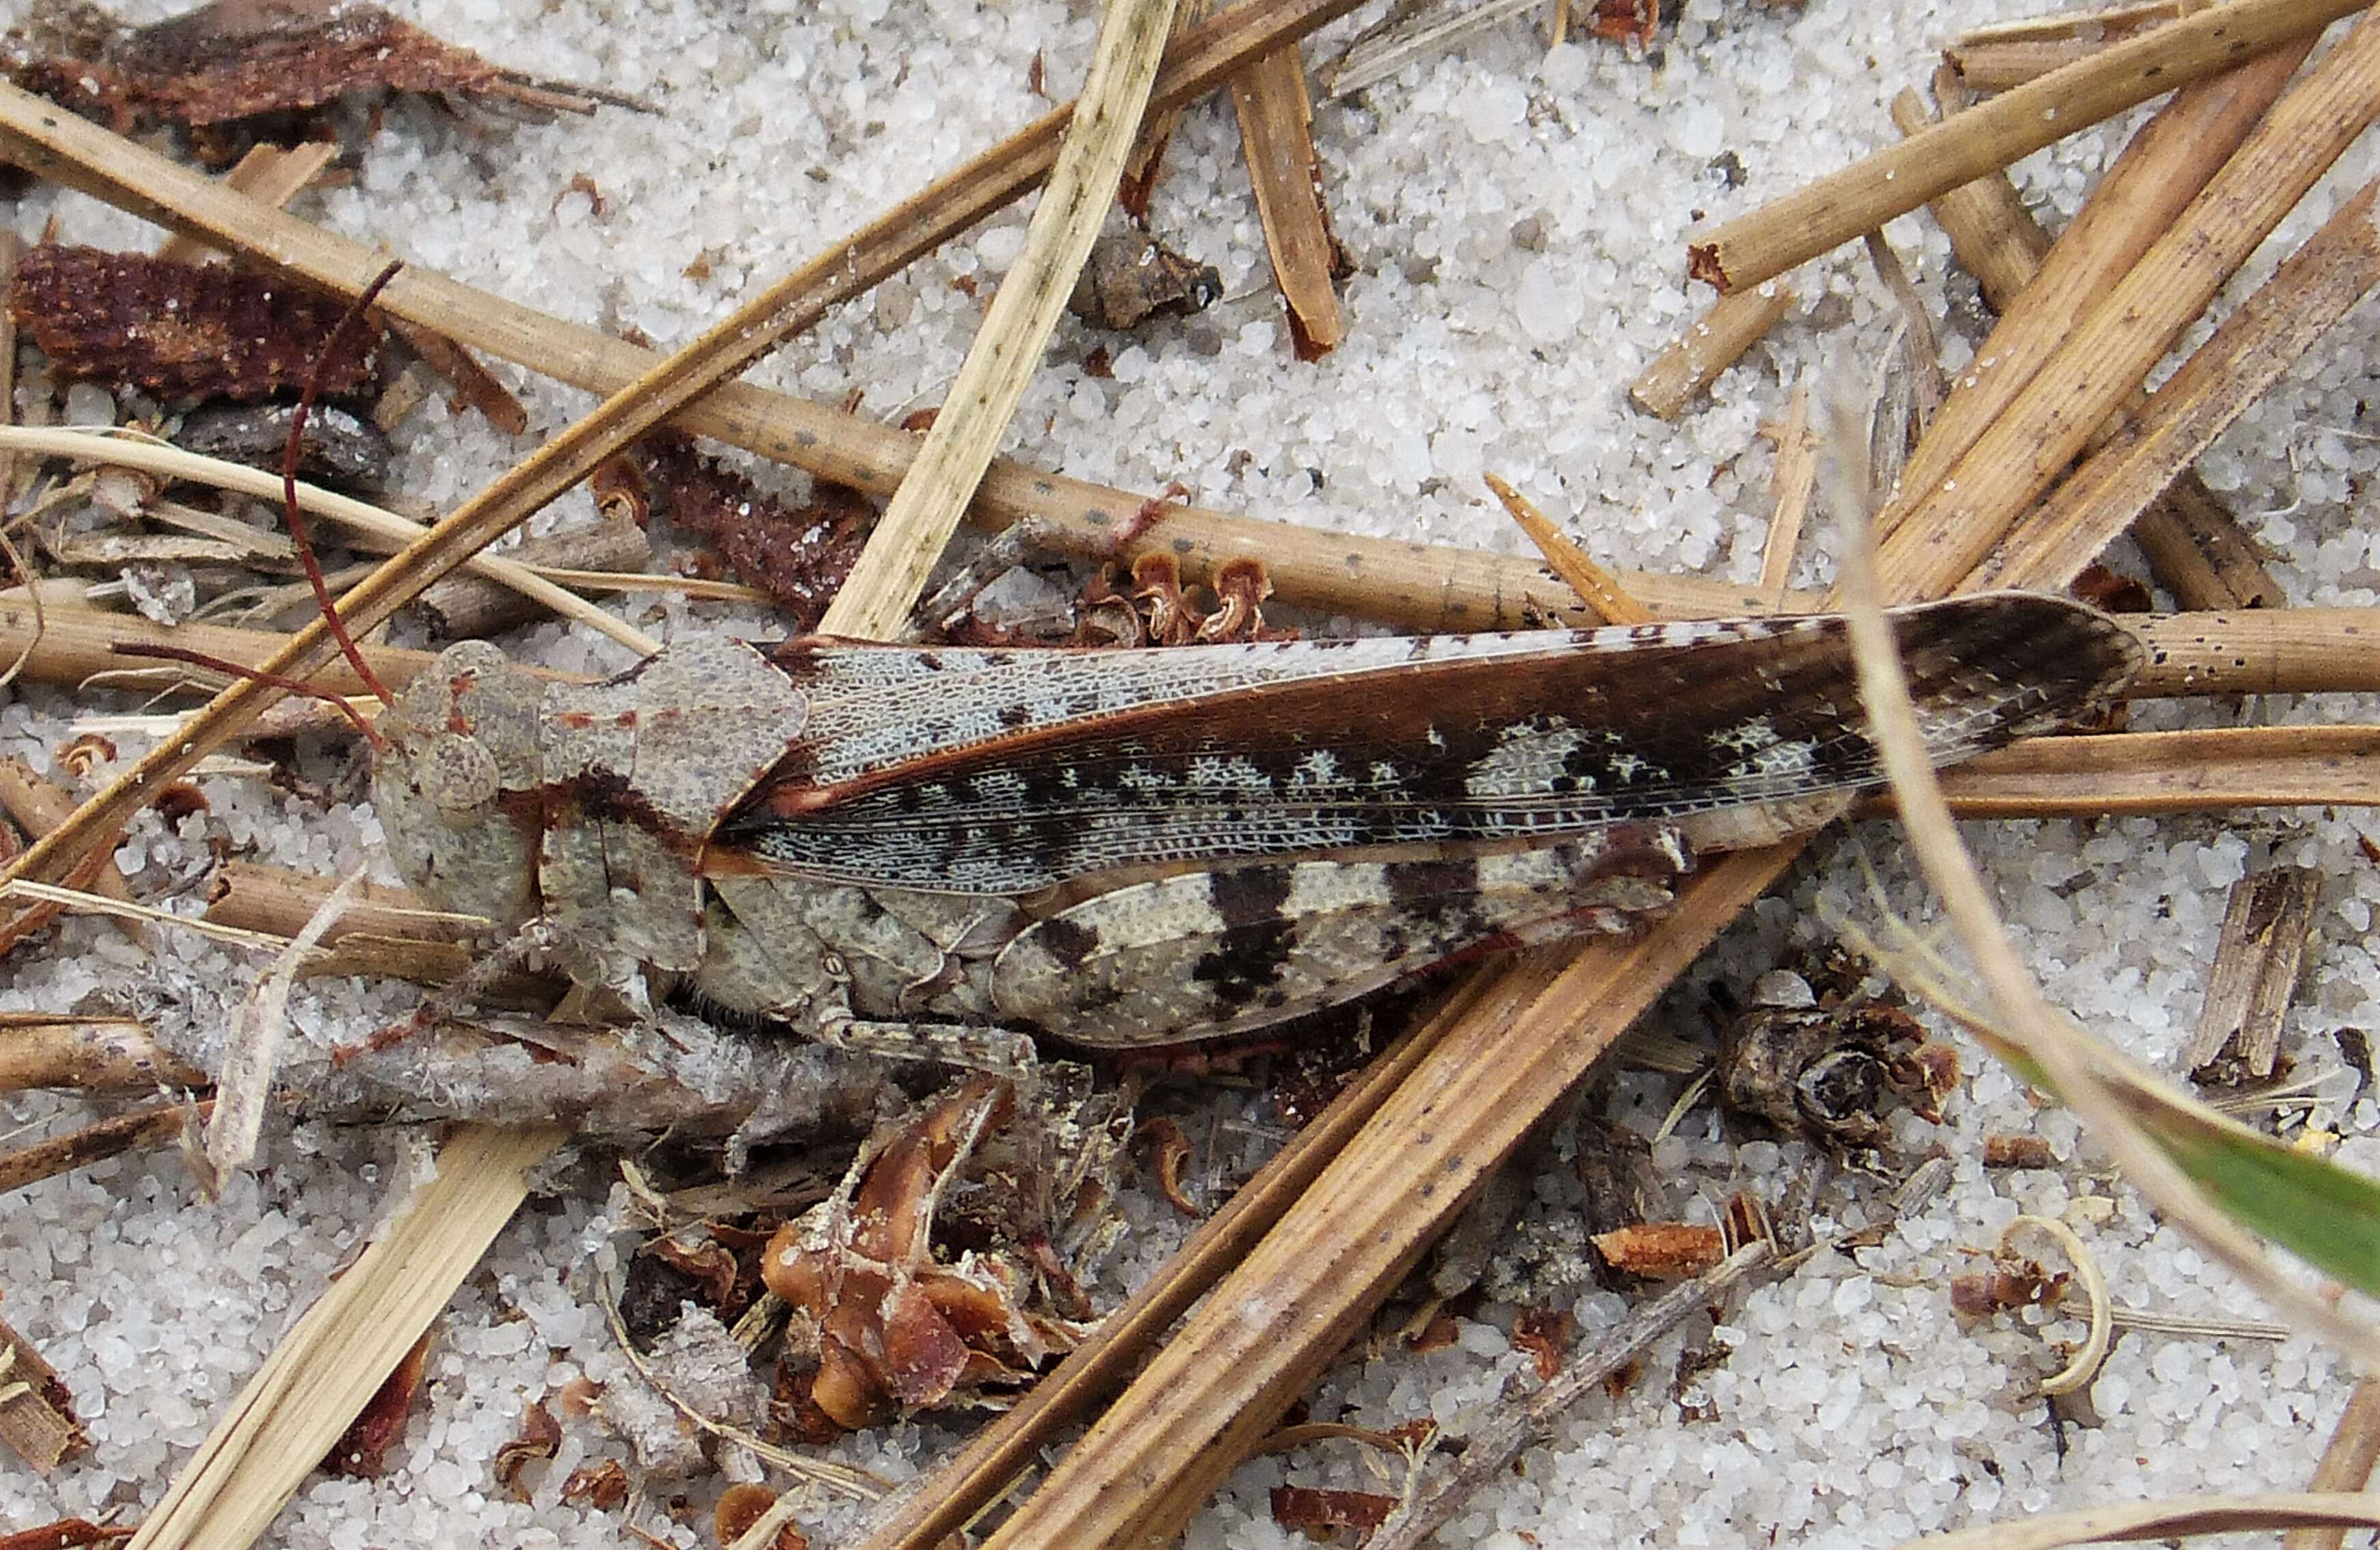 Image of Band-winged Grasshoppers